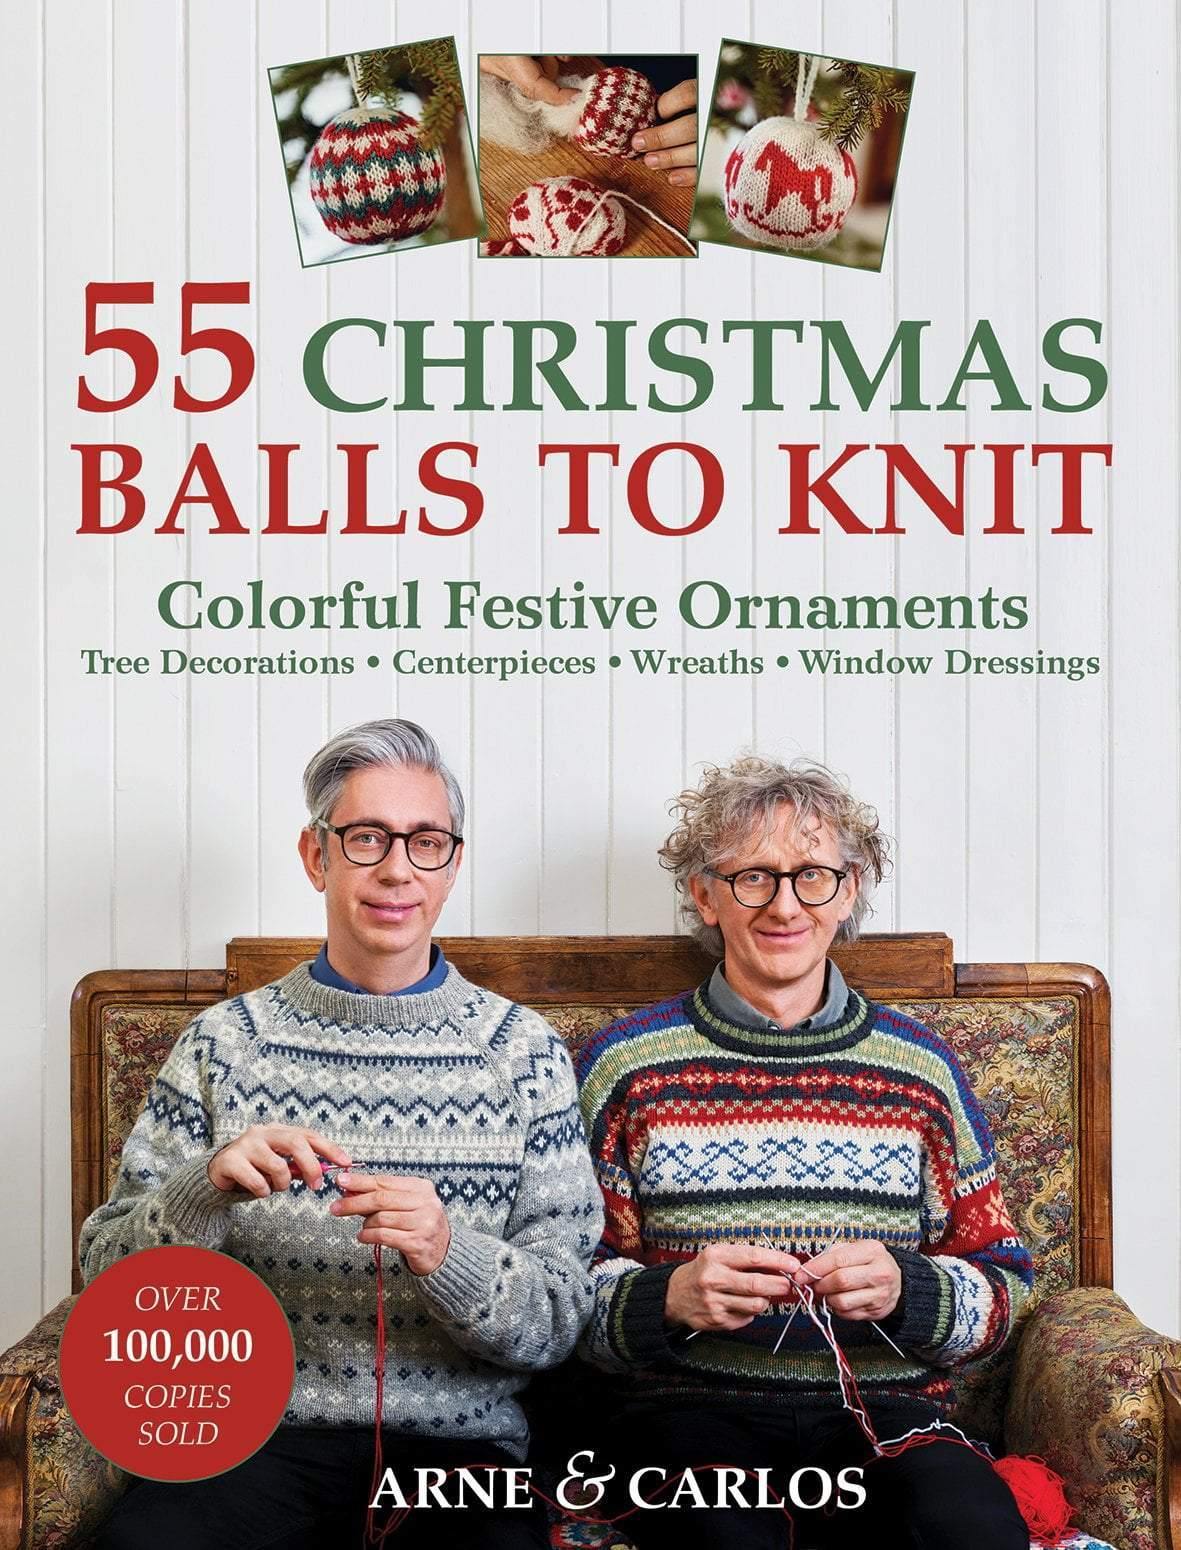 55 Christmas Balls to Knit by Arne & Carlos Search Press